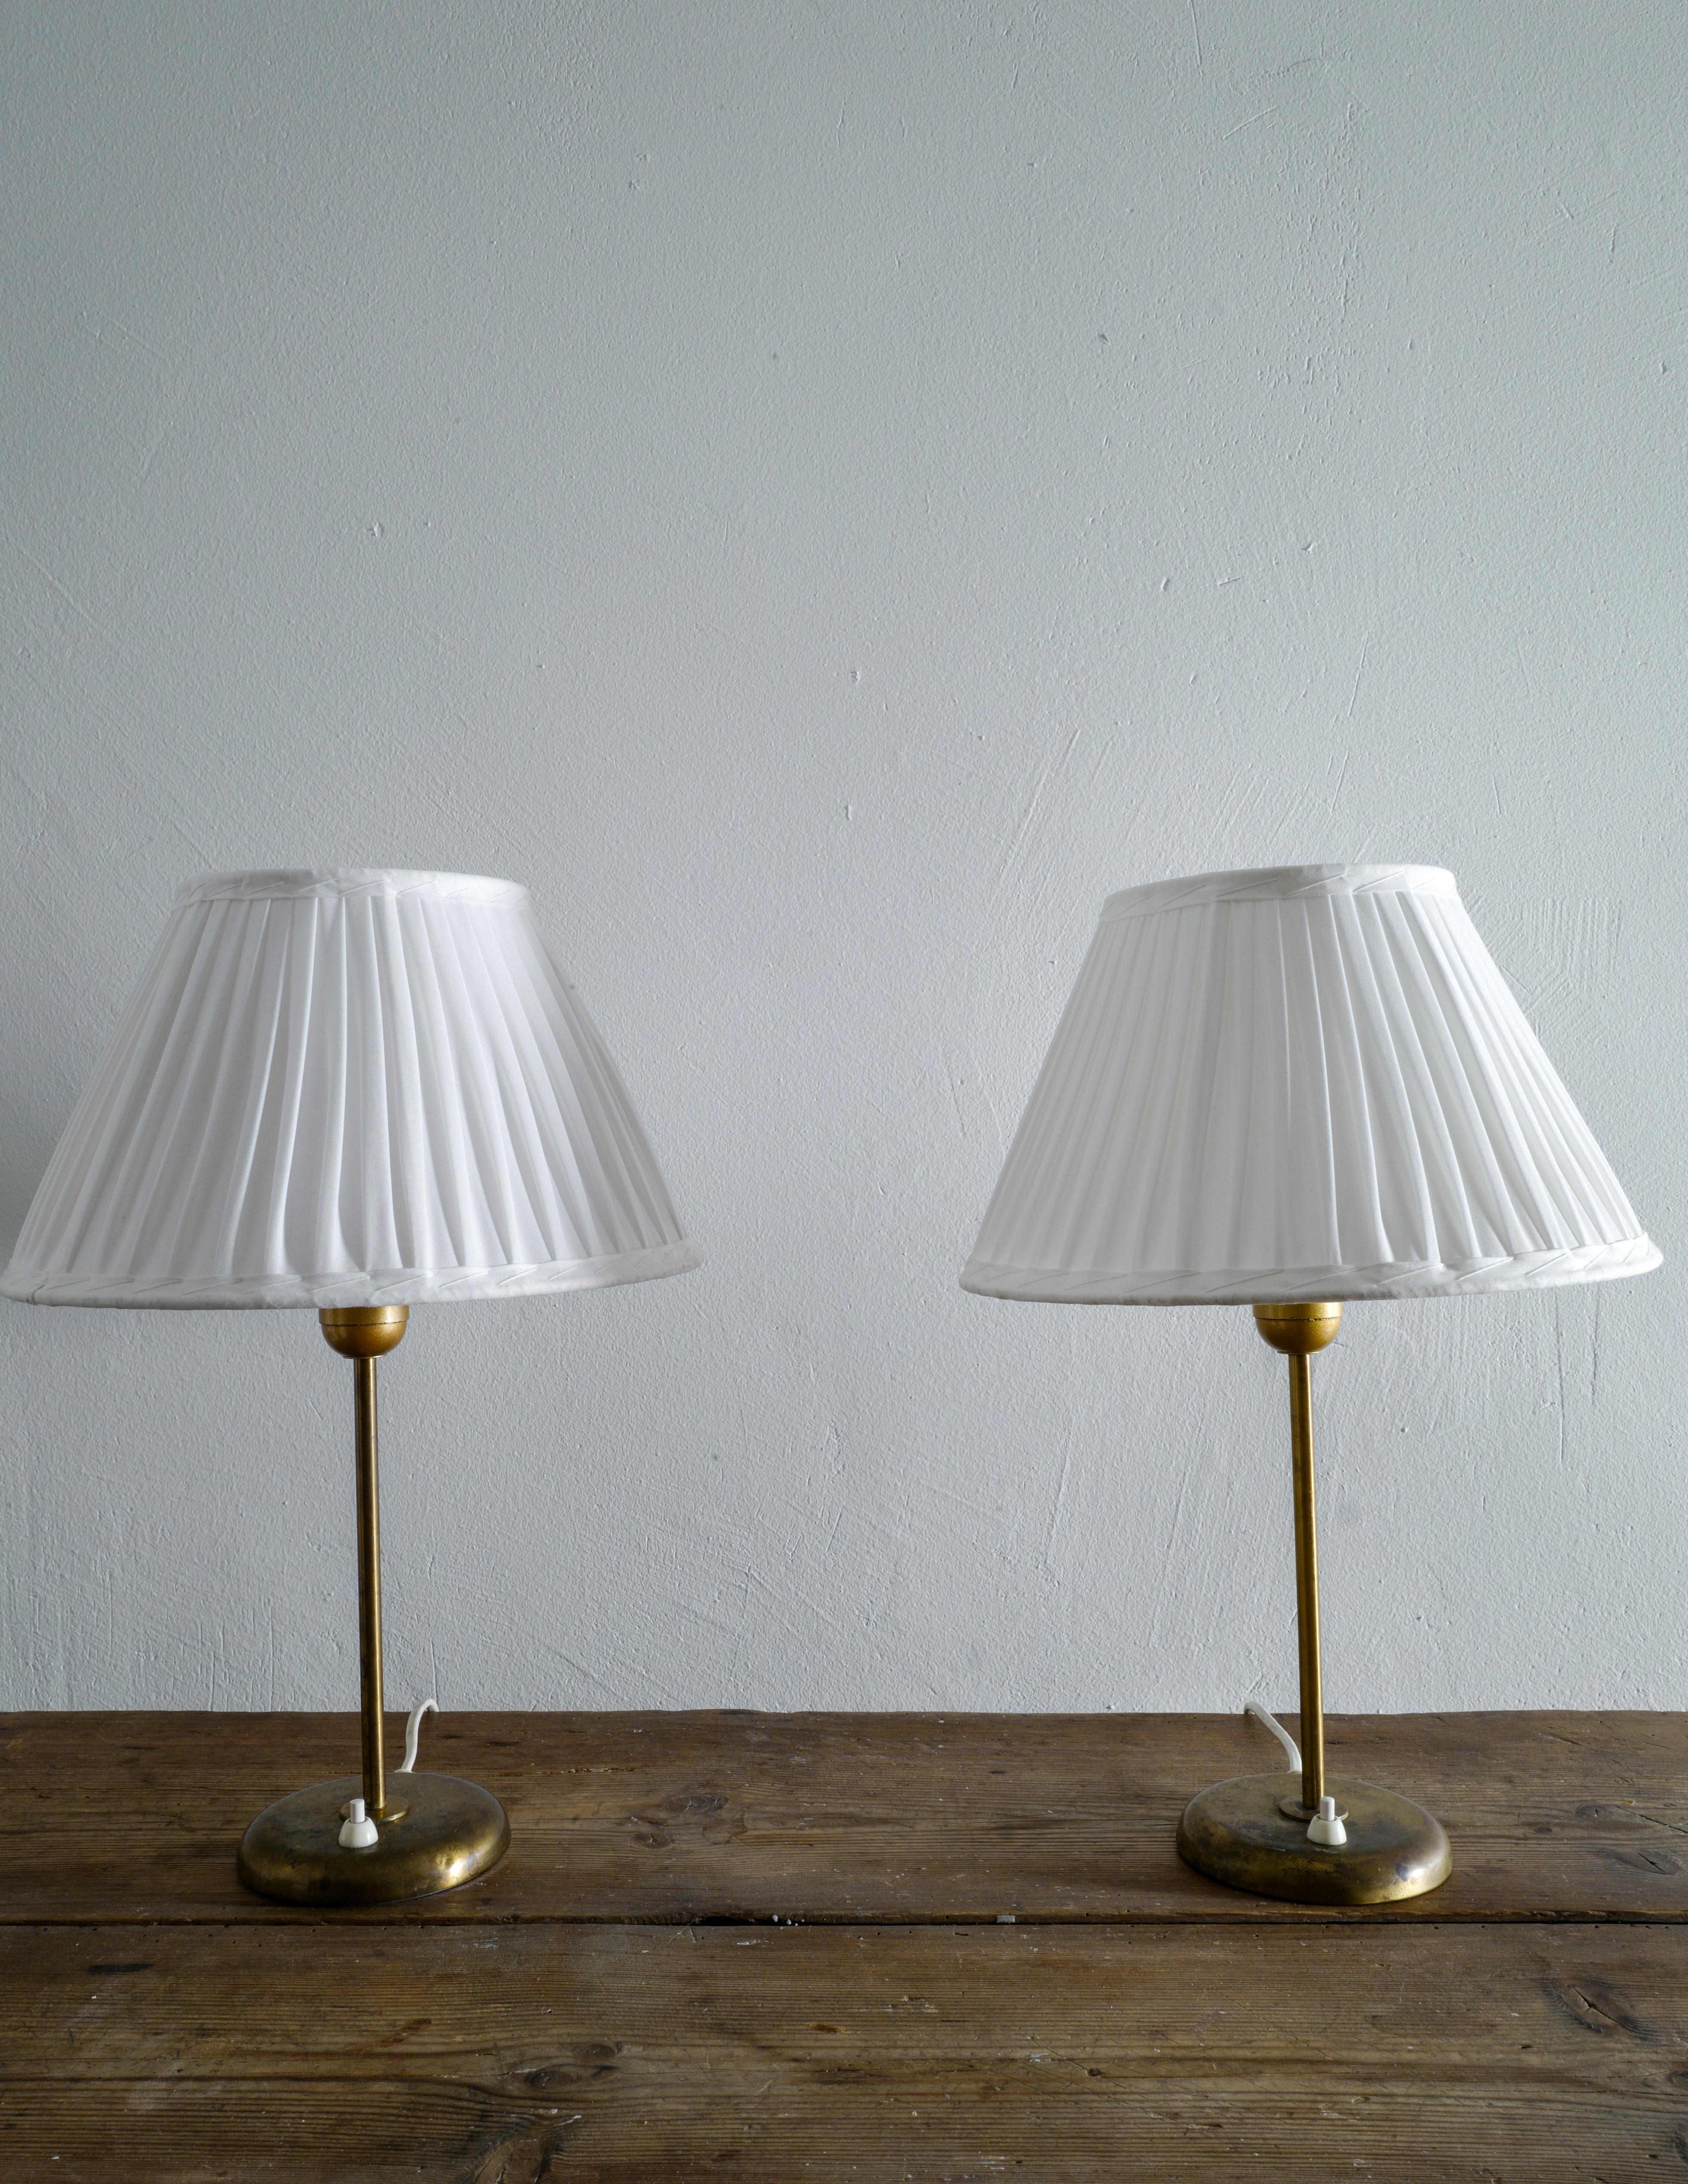 Rare pair of table lamps in brass produced by Böhlmark, Sweden in the 1950s. Lamps are in good vintage condition and showing beautiful patina from age and use. Shades are included in the purchase.